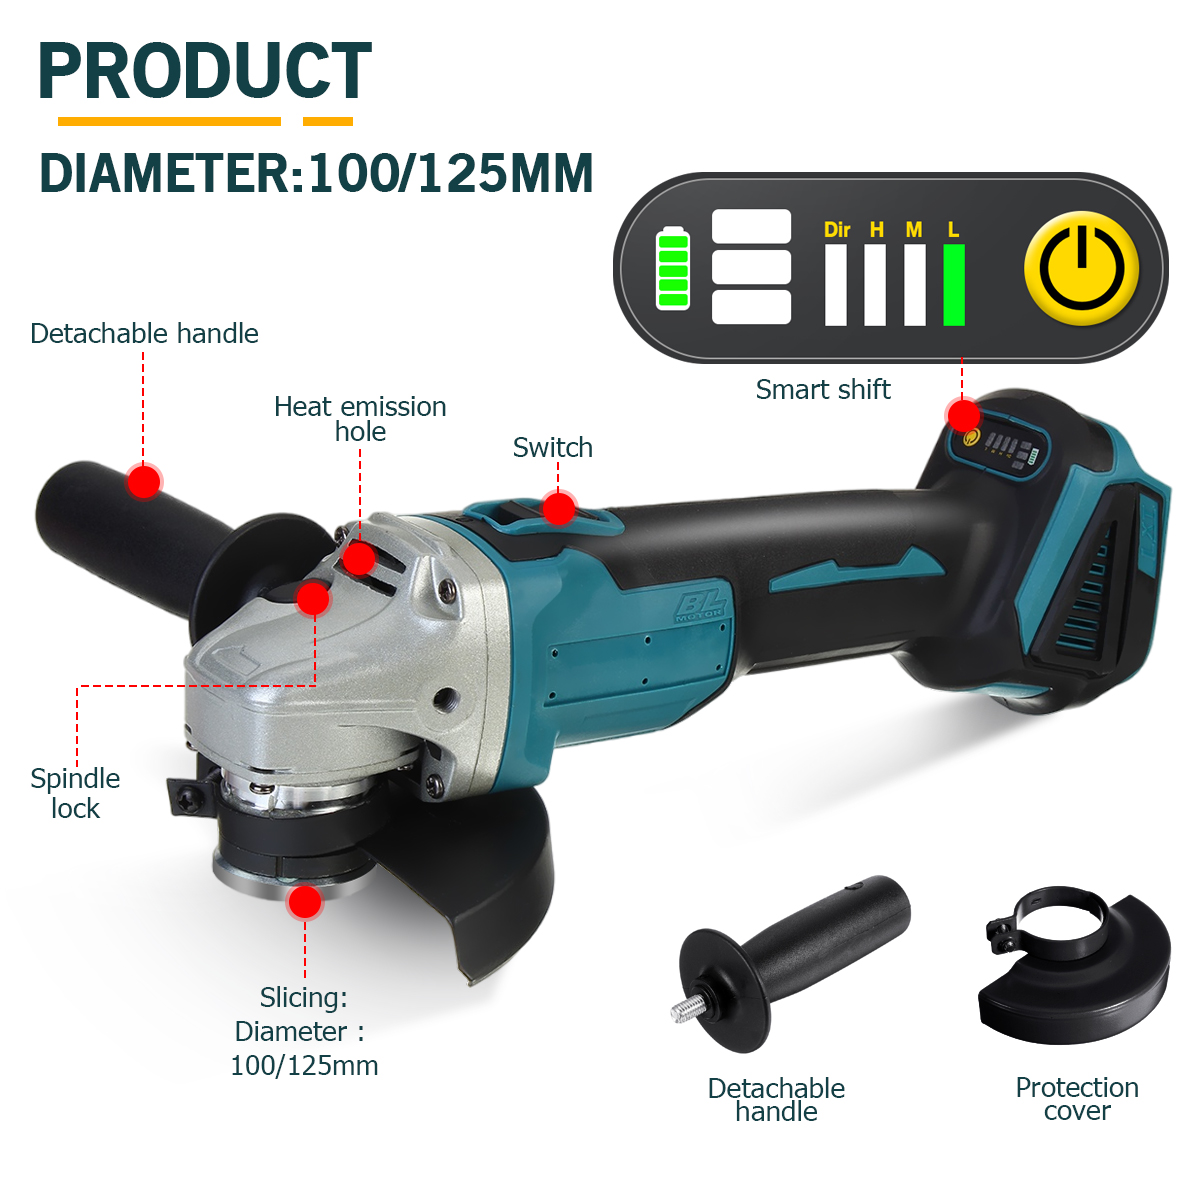 BLMIATKO-18V-860W-4-Speed-Regulated-Cordless-Brushless-Angle-Grinder-For-Makita-Battery-Electric-Gri-1715153-5